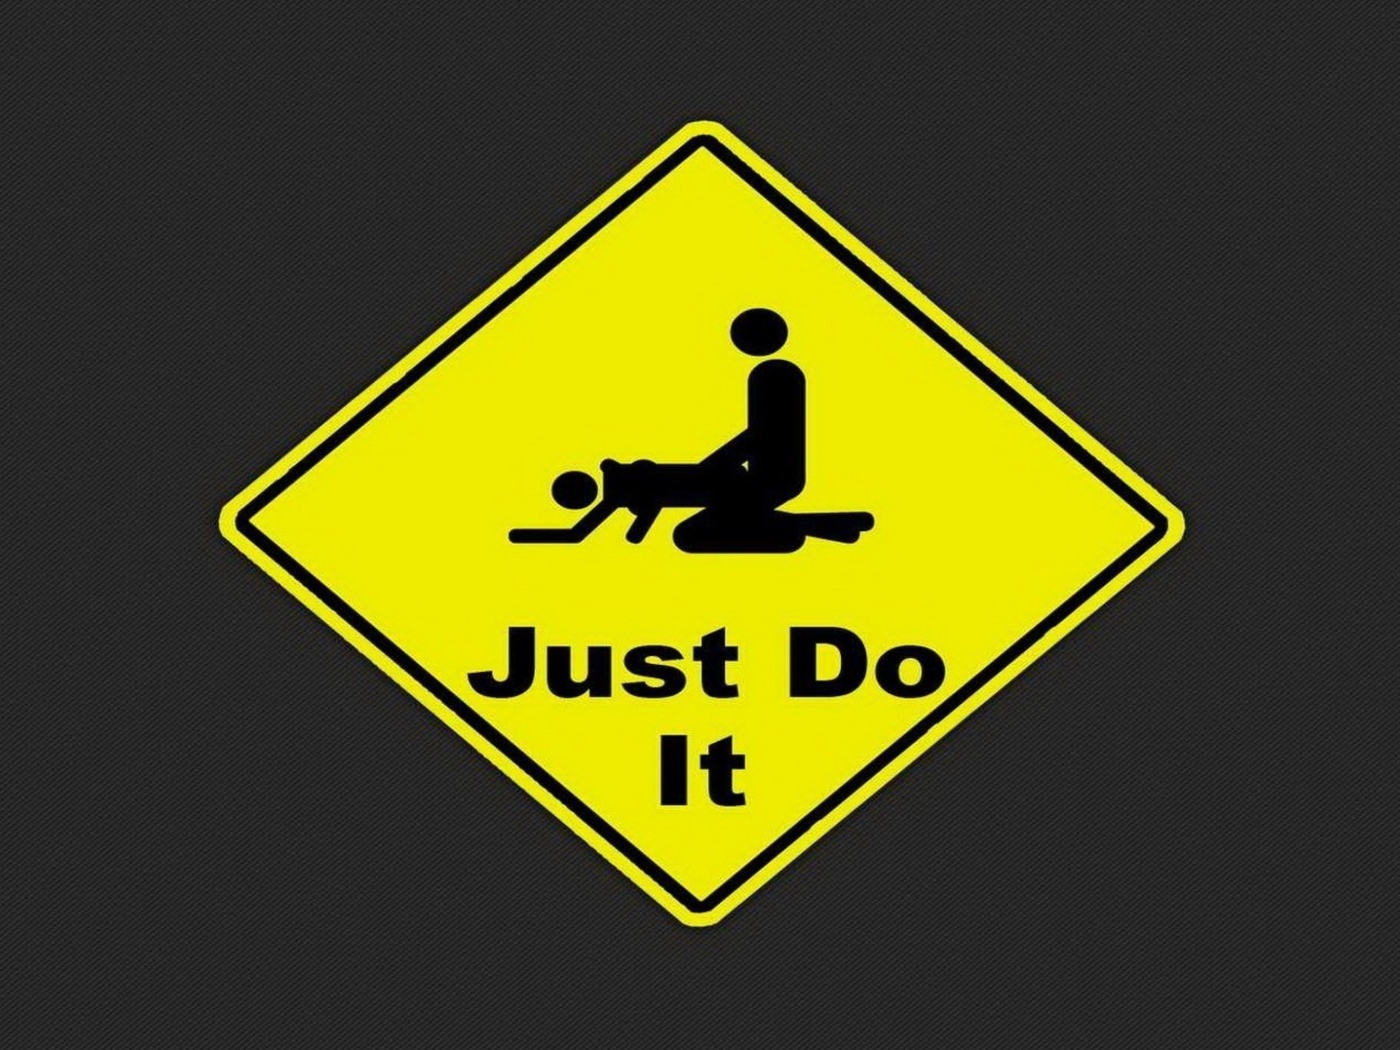 Just Do It Funny Sign wallpaper 1400x1050